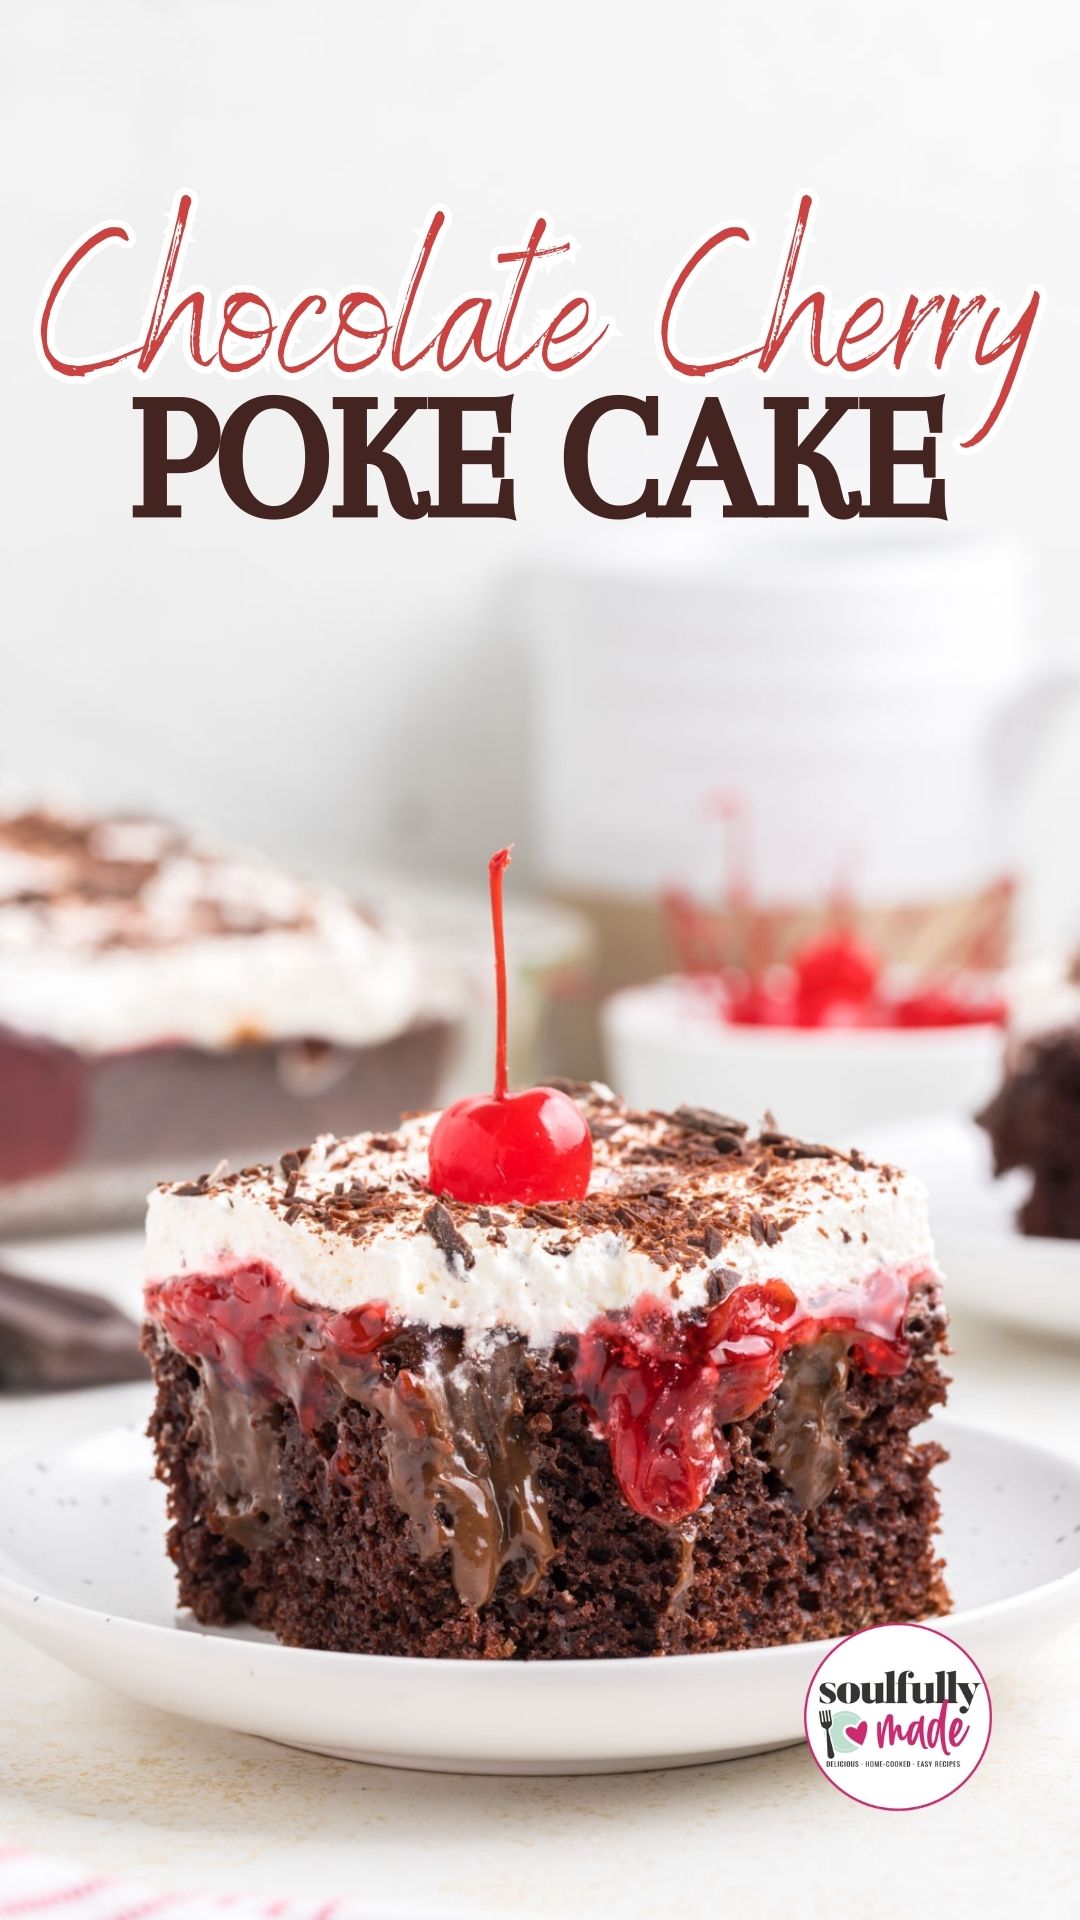 Chocolate Cherry Poke Cake is featured on a white plate and topped with shaved chocolate and a cherry.